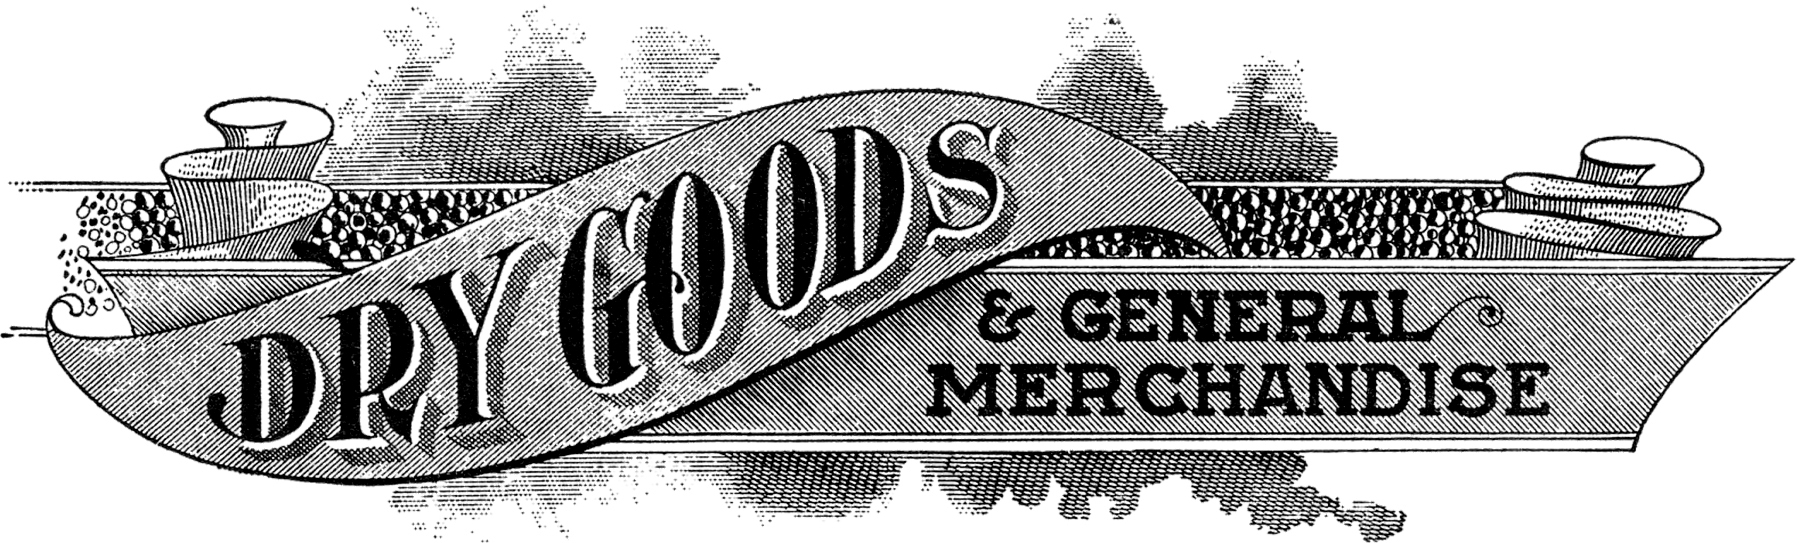 Antique Dry Goods Trade Sign! - The Graphics Fairy